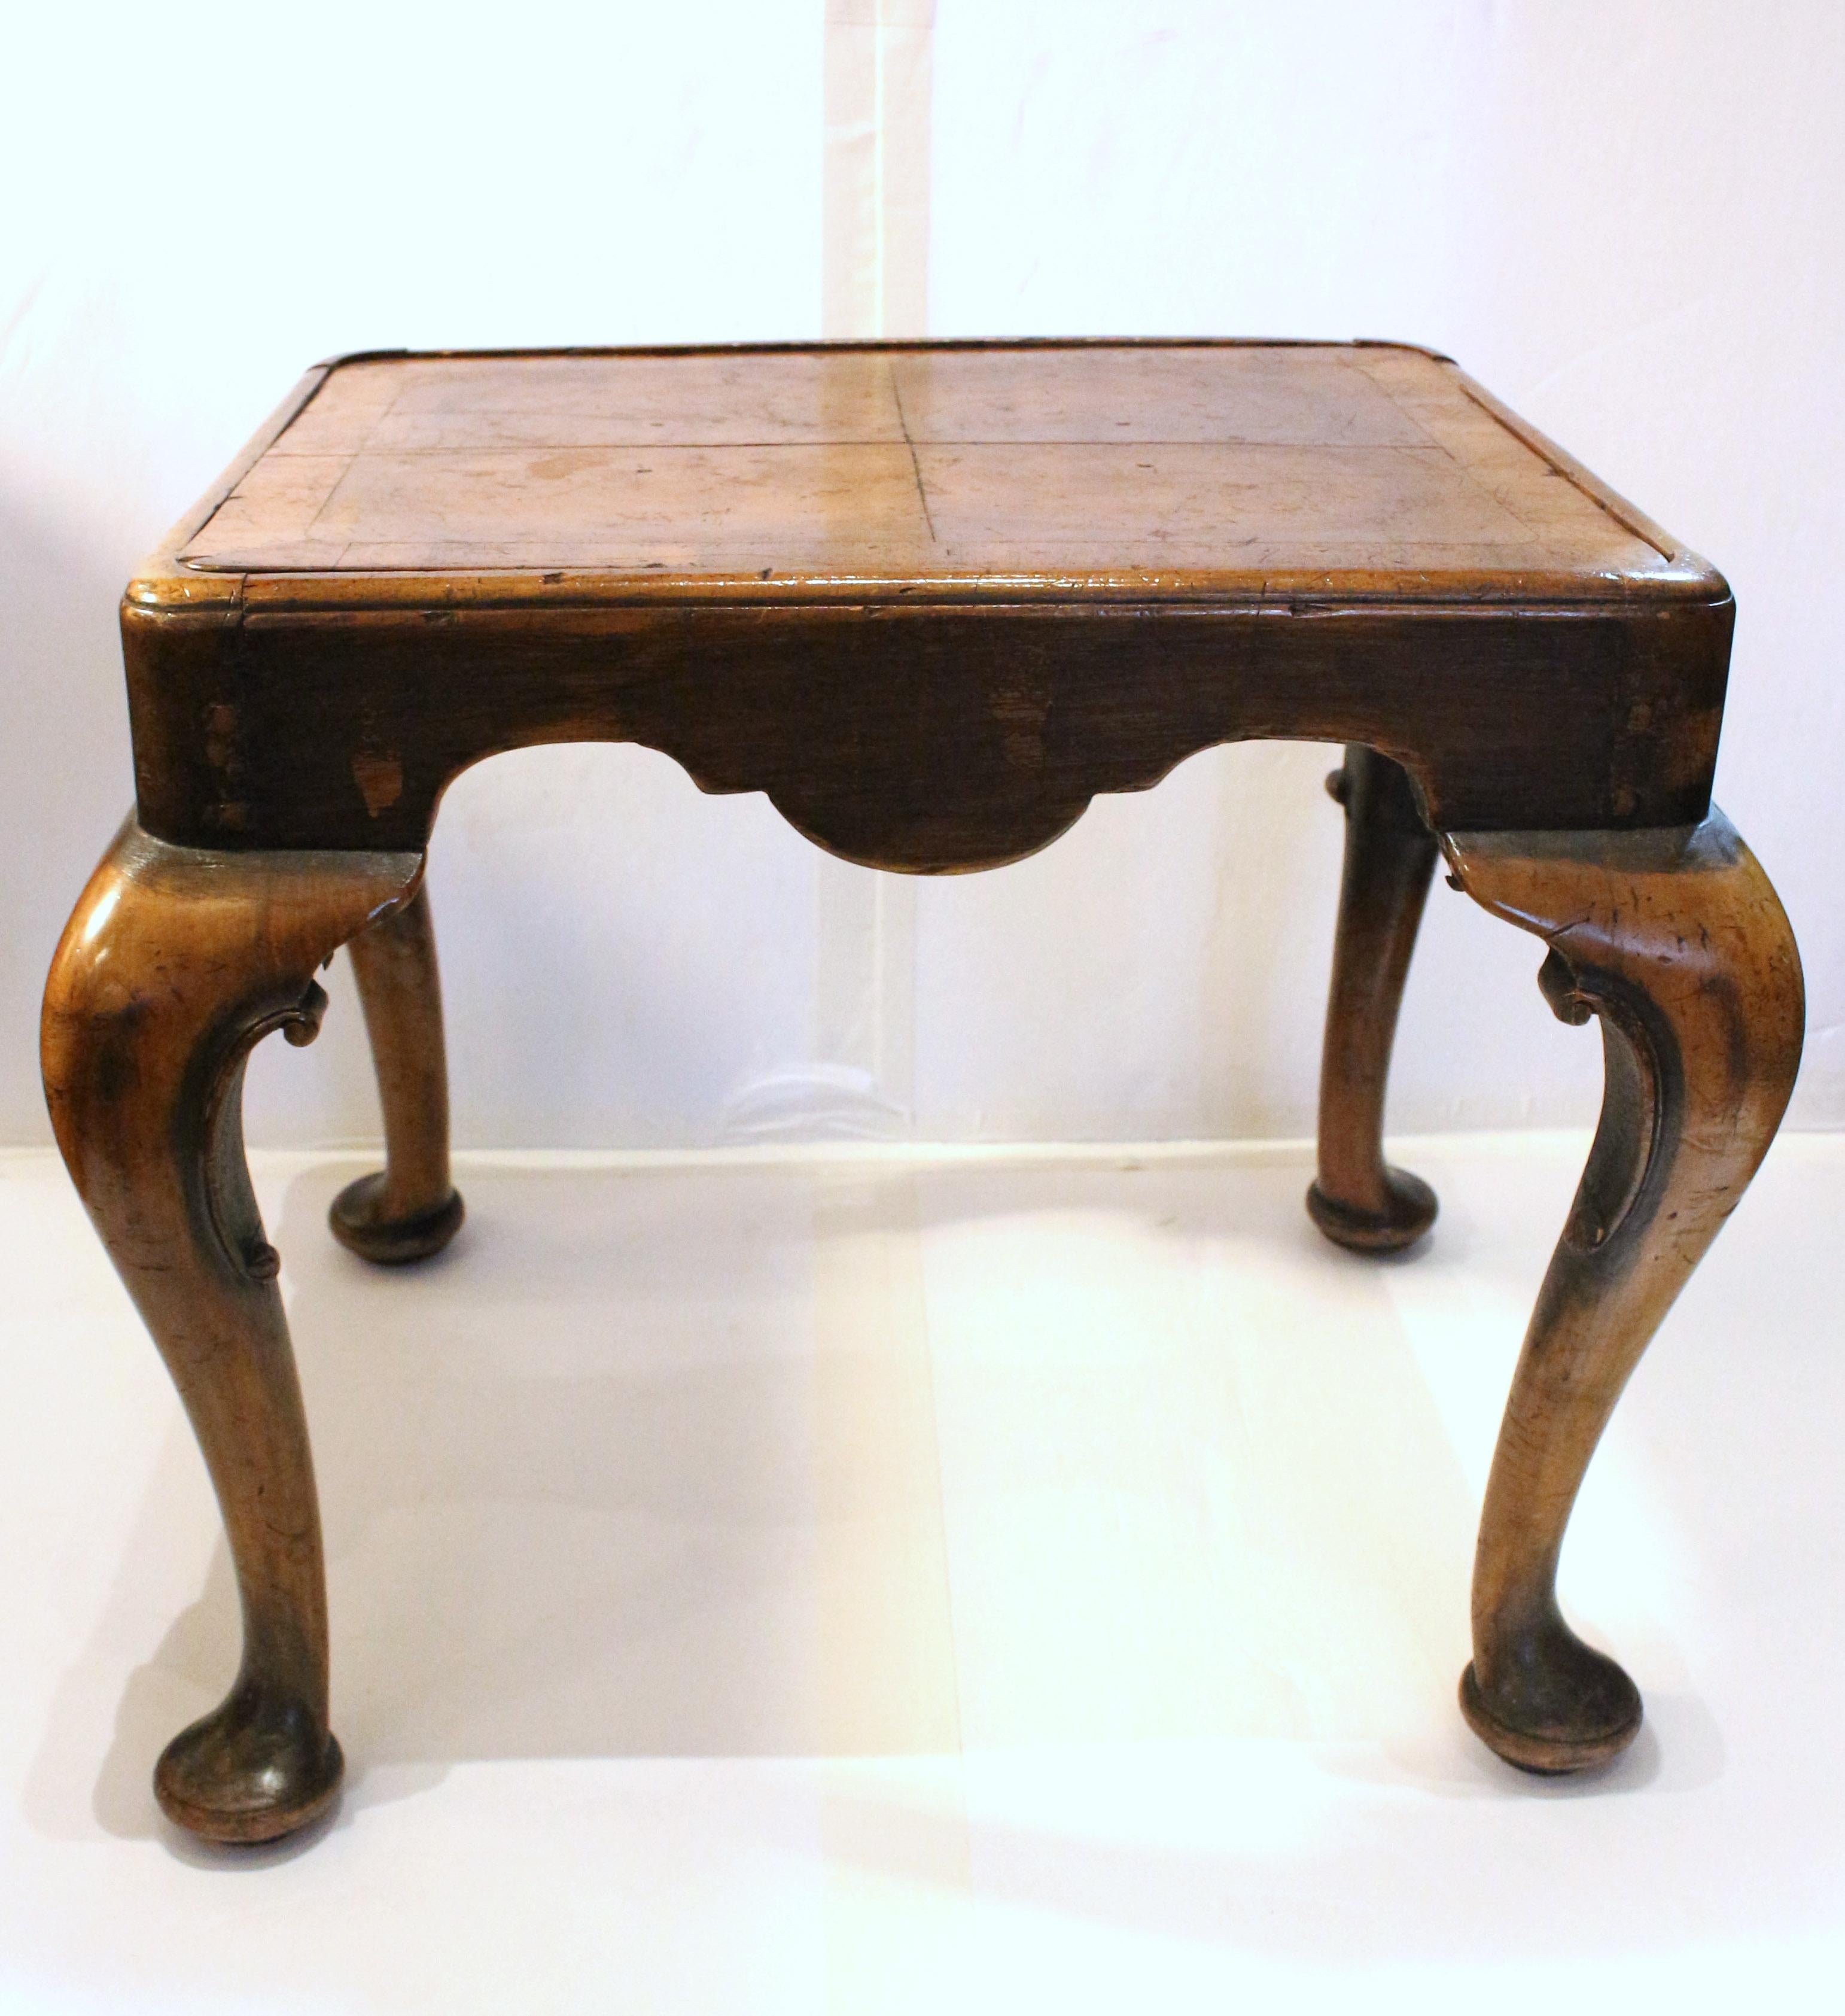 Circa 1880 Queen Anne style footstool or small bench, English. Walnut. Very well executed cabriole legs with c-scroll moldings & pad feet. Inset, removable walnut seat with loose needlework cushion. Could be used as a table given the beautiful